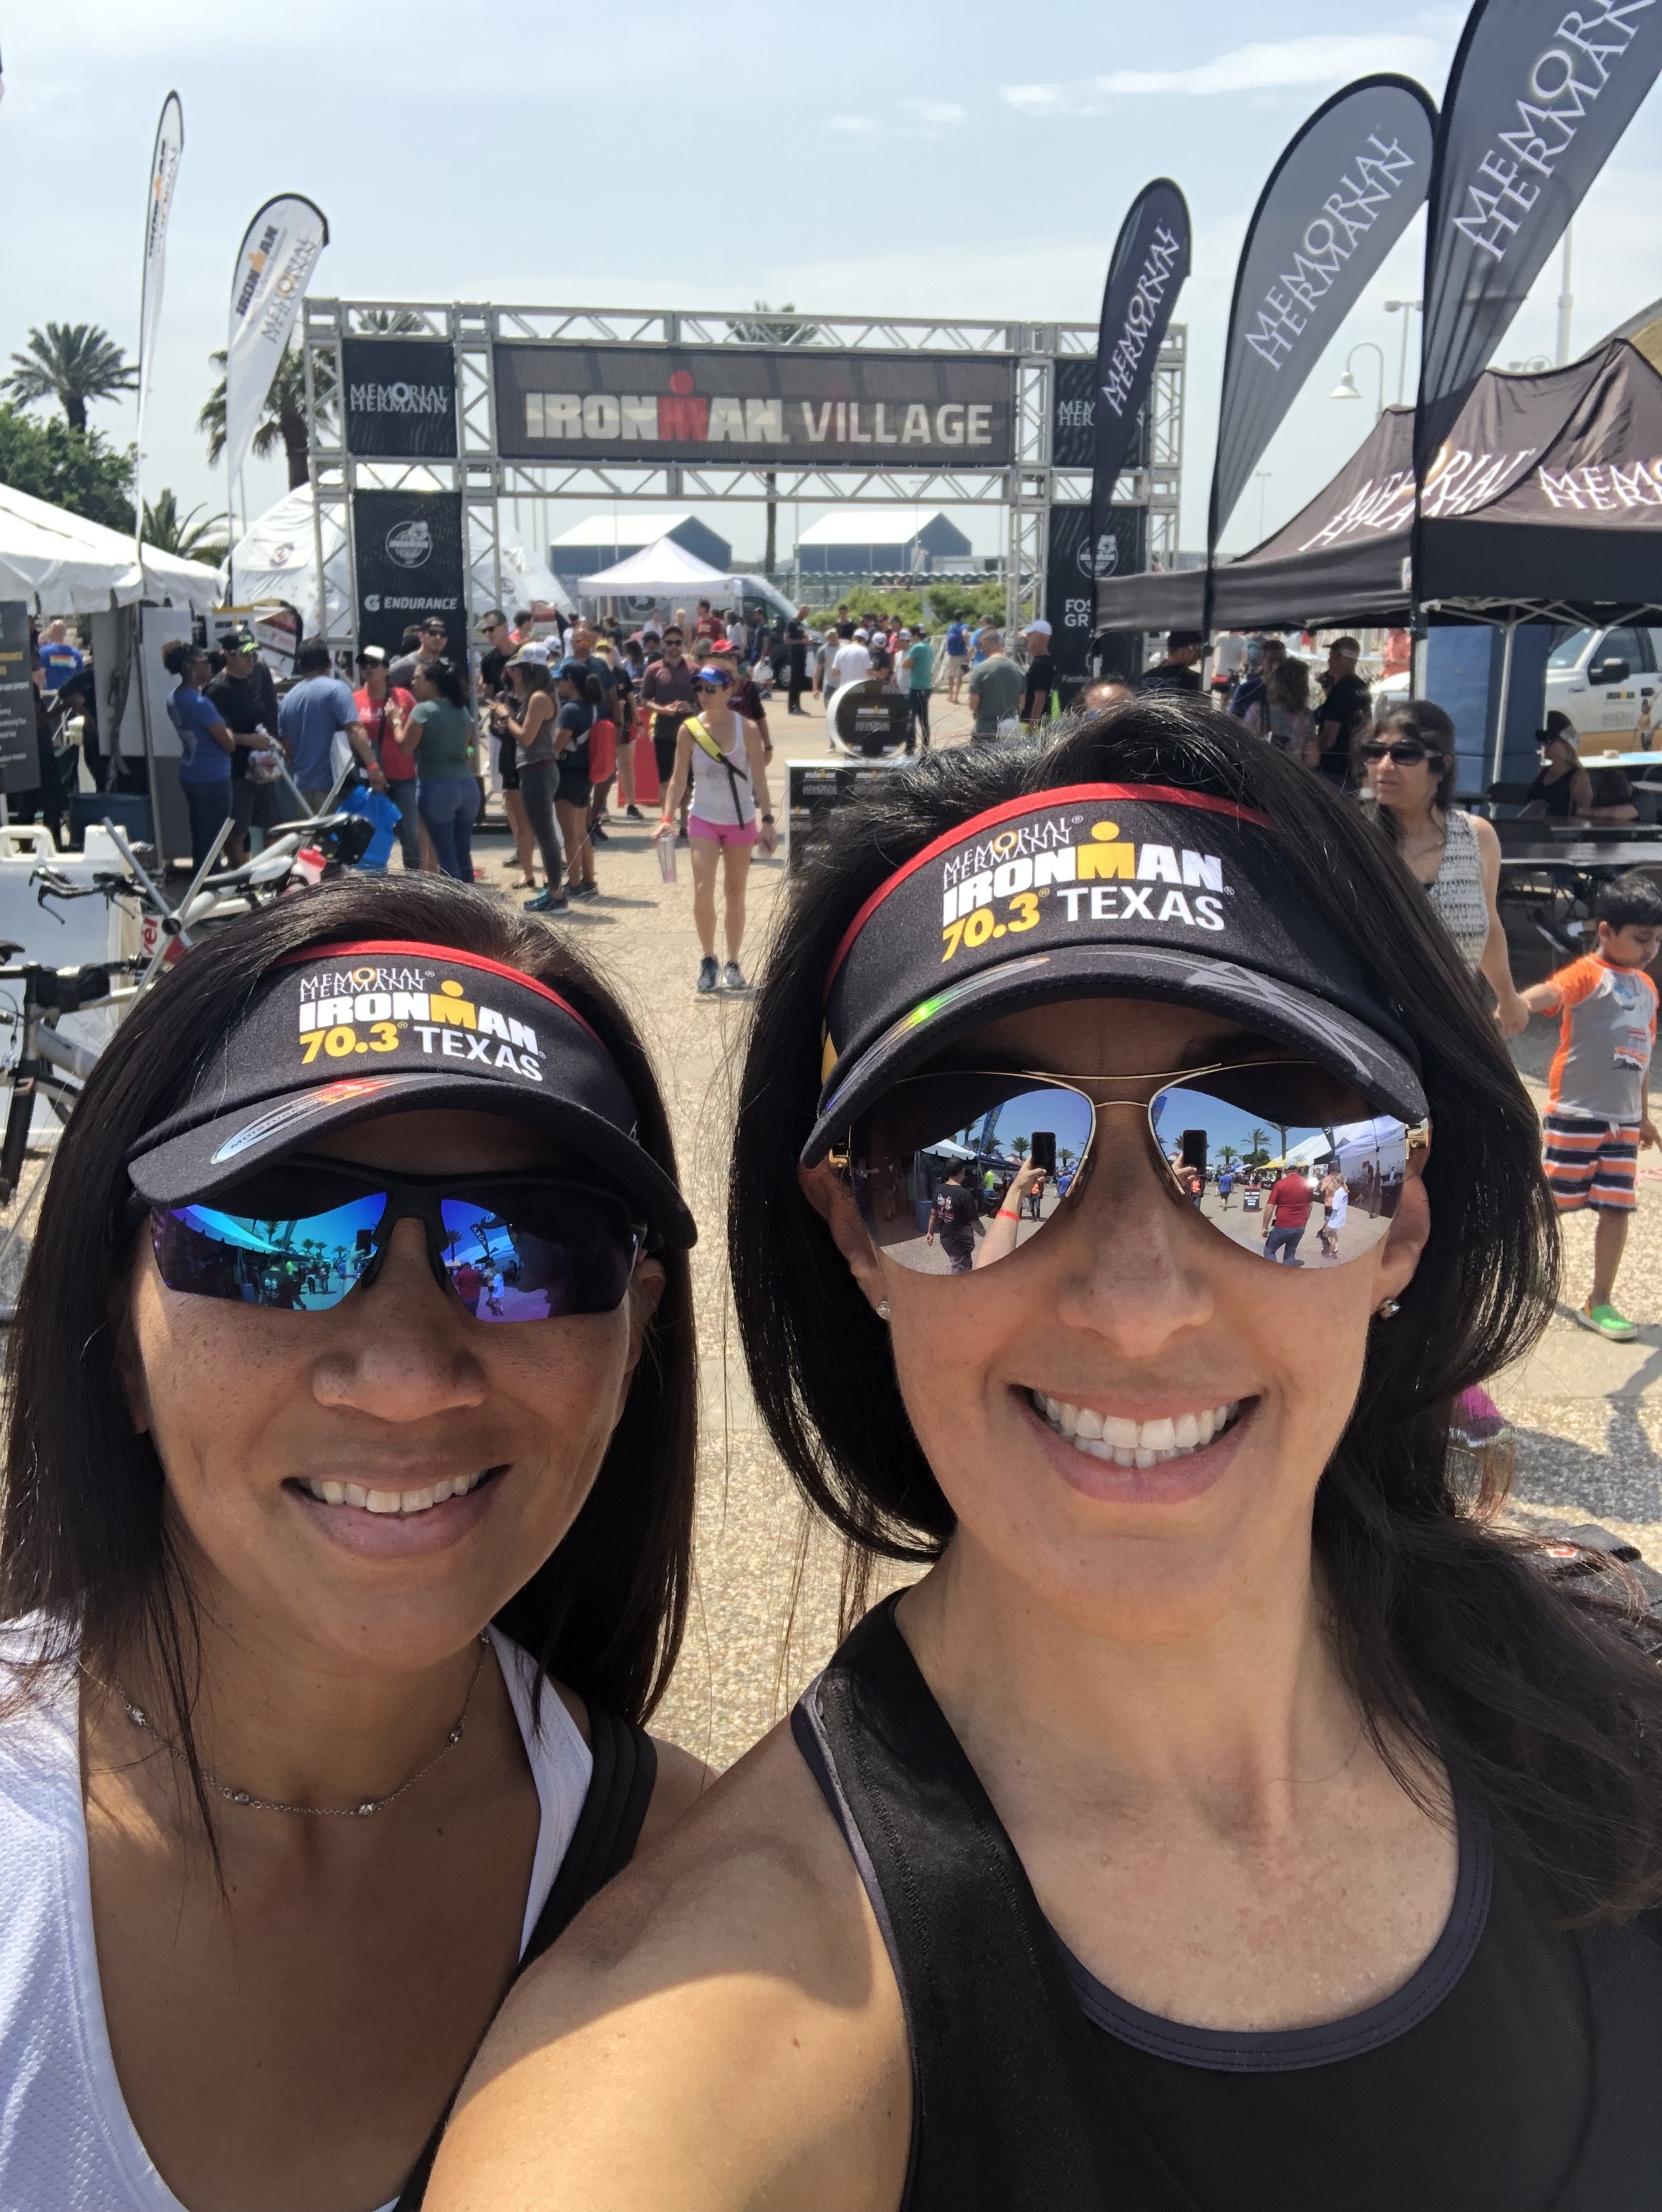  With our new IM70.3 Texas visors! 